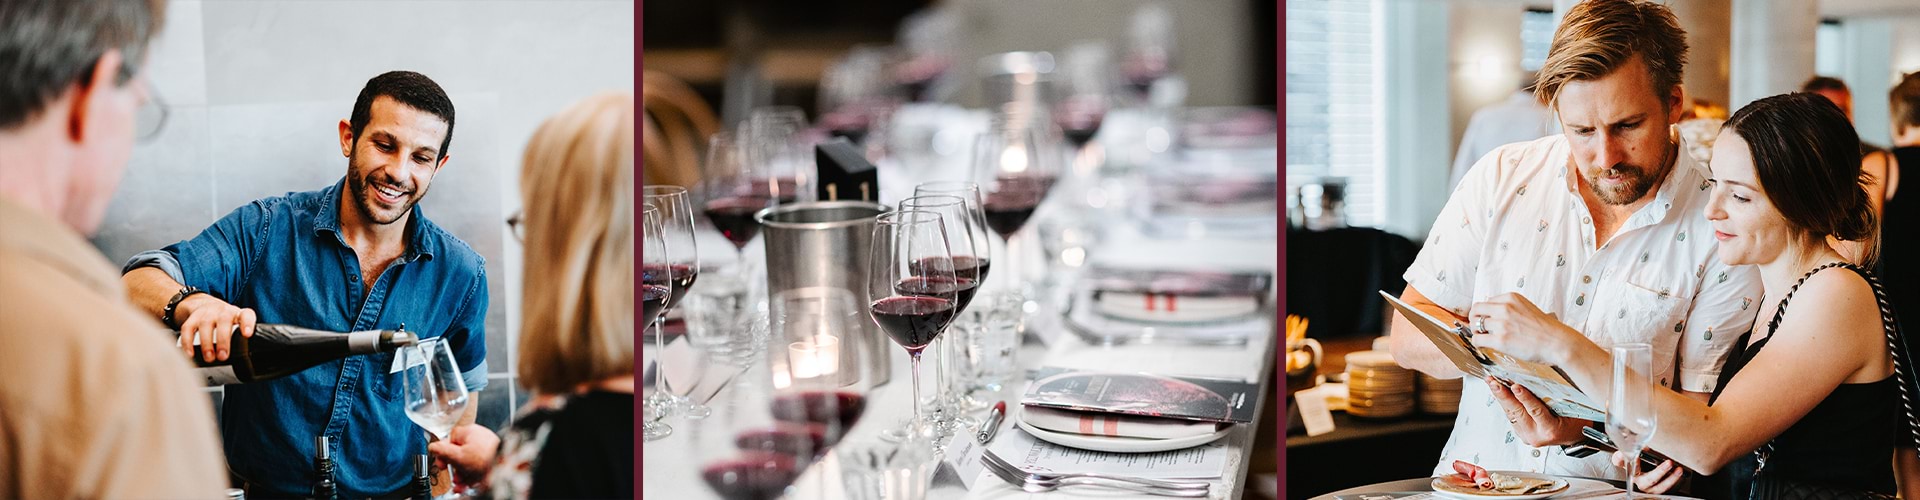 What's On Food and Wine Events Australia